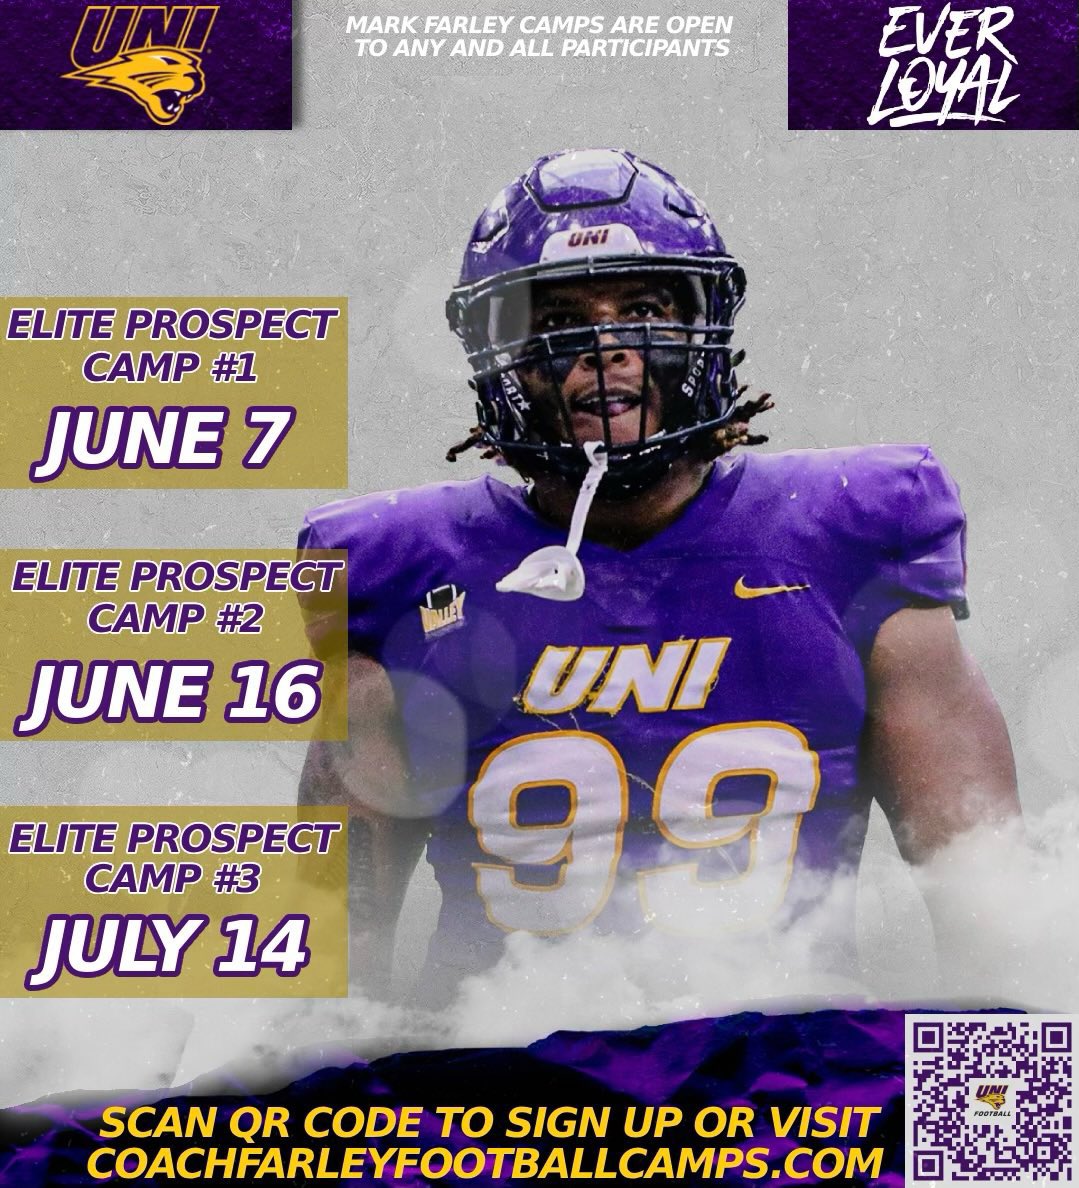 Thanks for the invite @UNIFootball @BrycePaup. Looking forward to coming to compete!